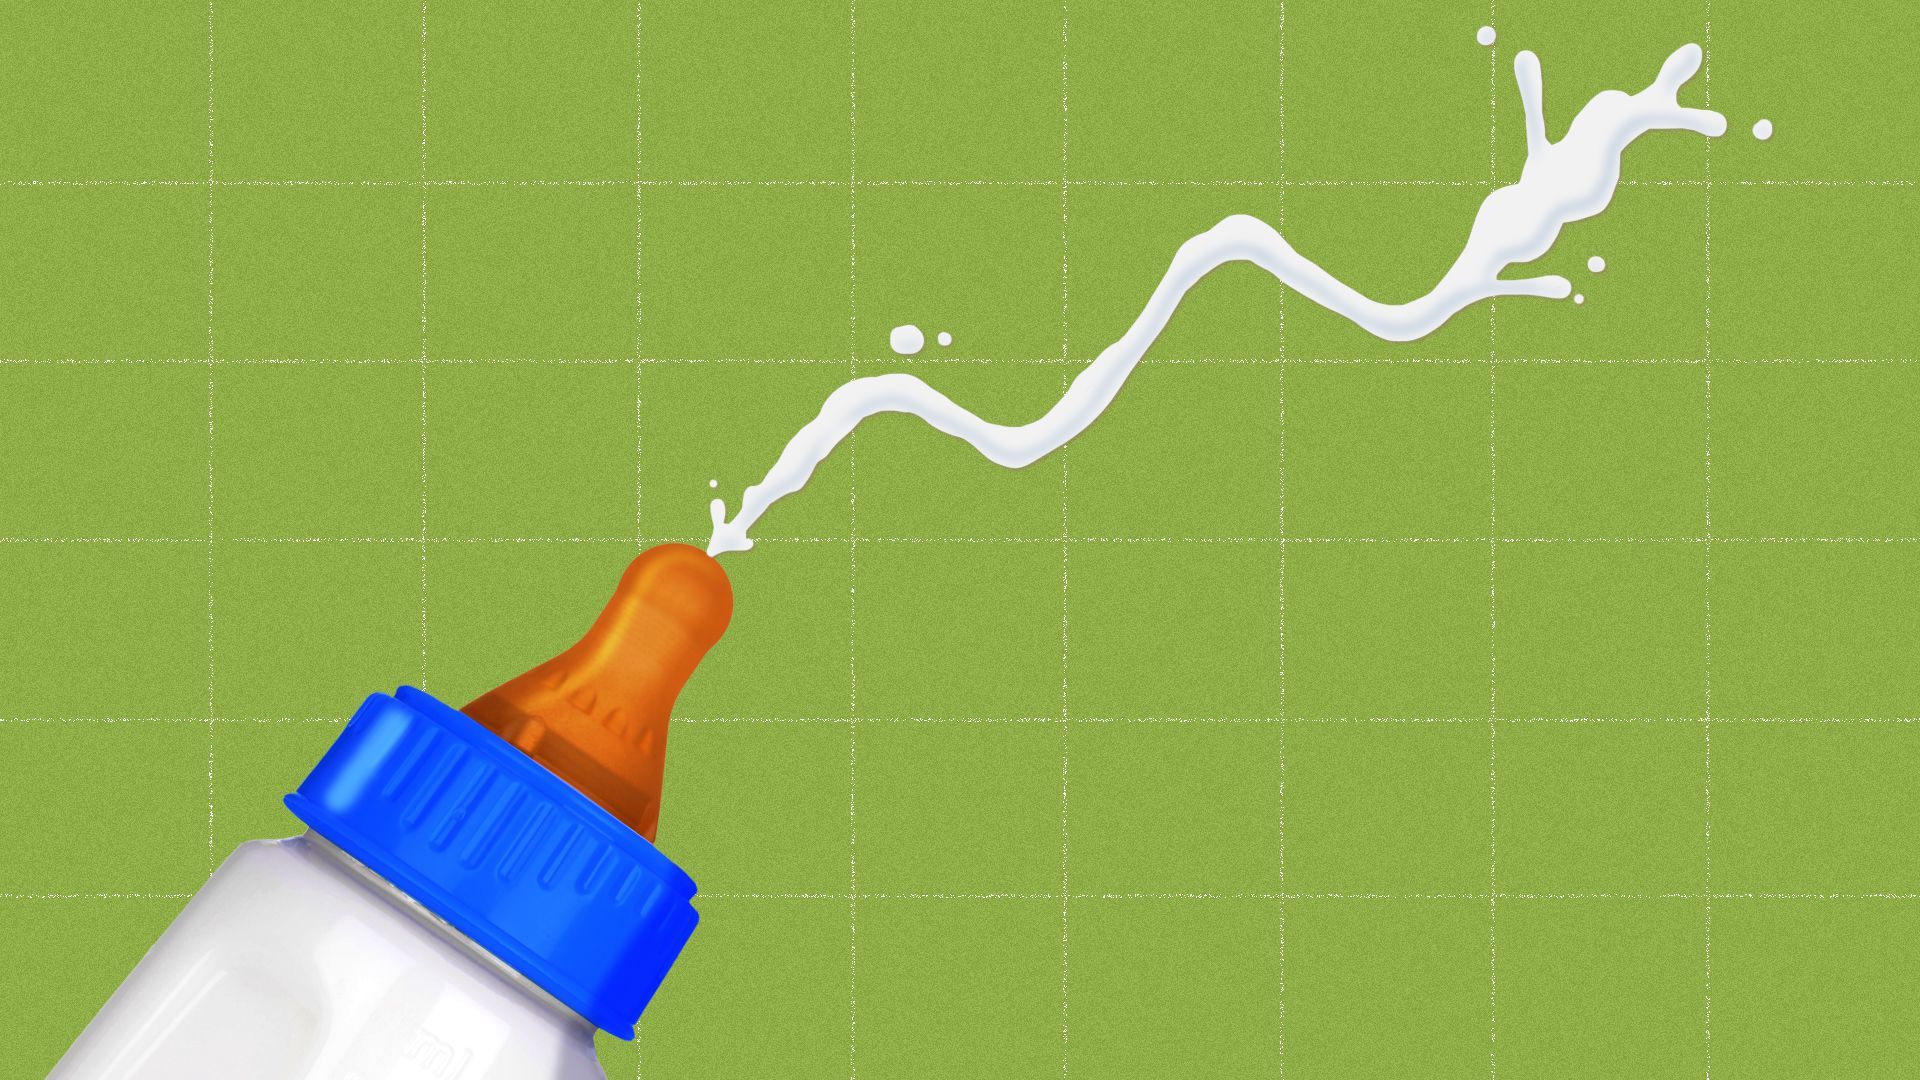 Illustration of milk coming out of a bottle in the shape of an upward trend line